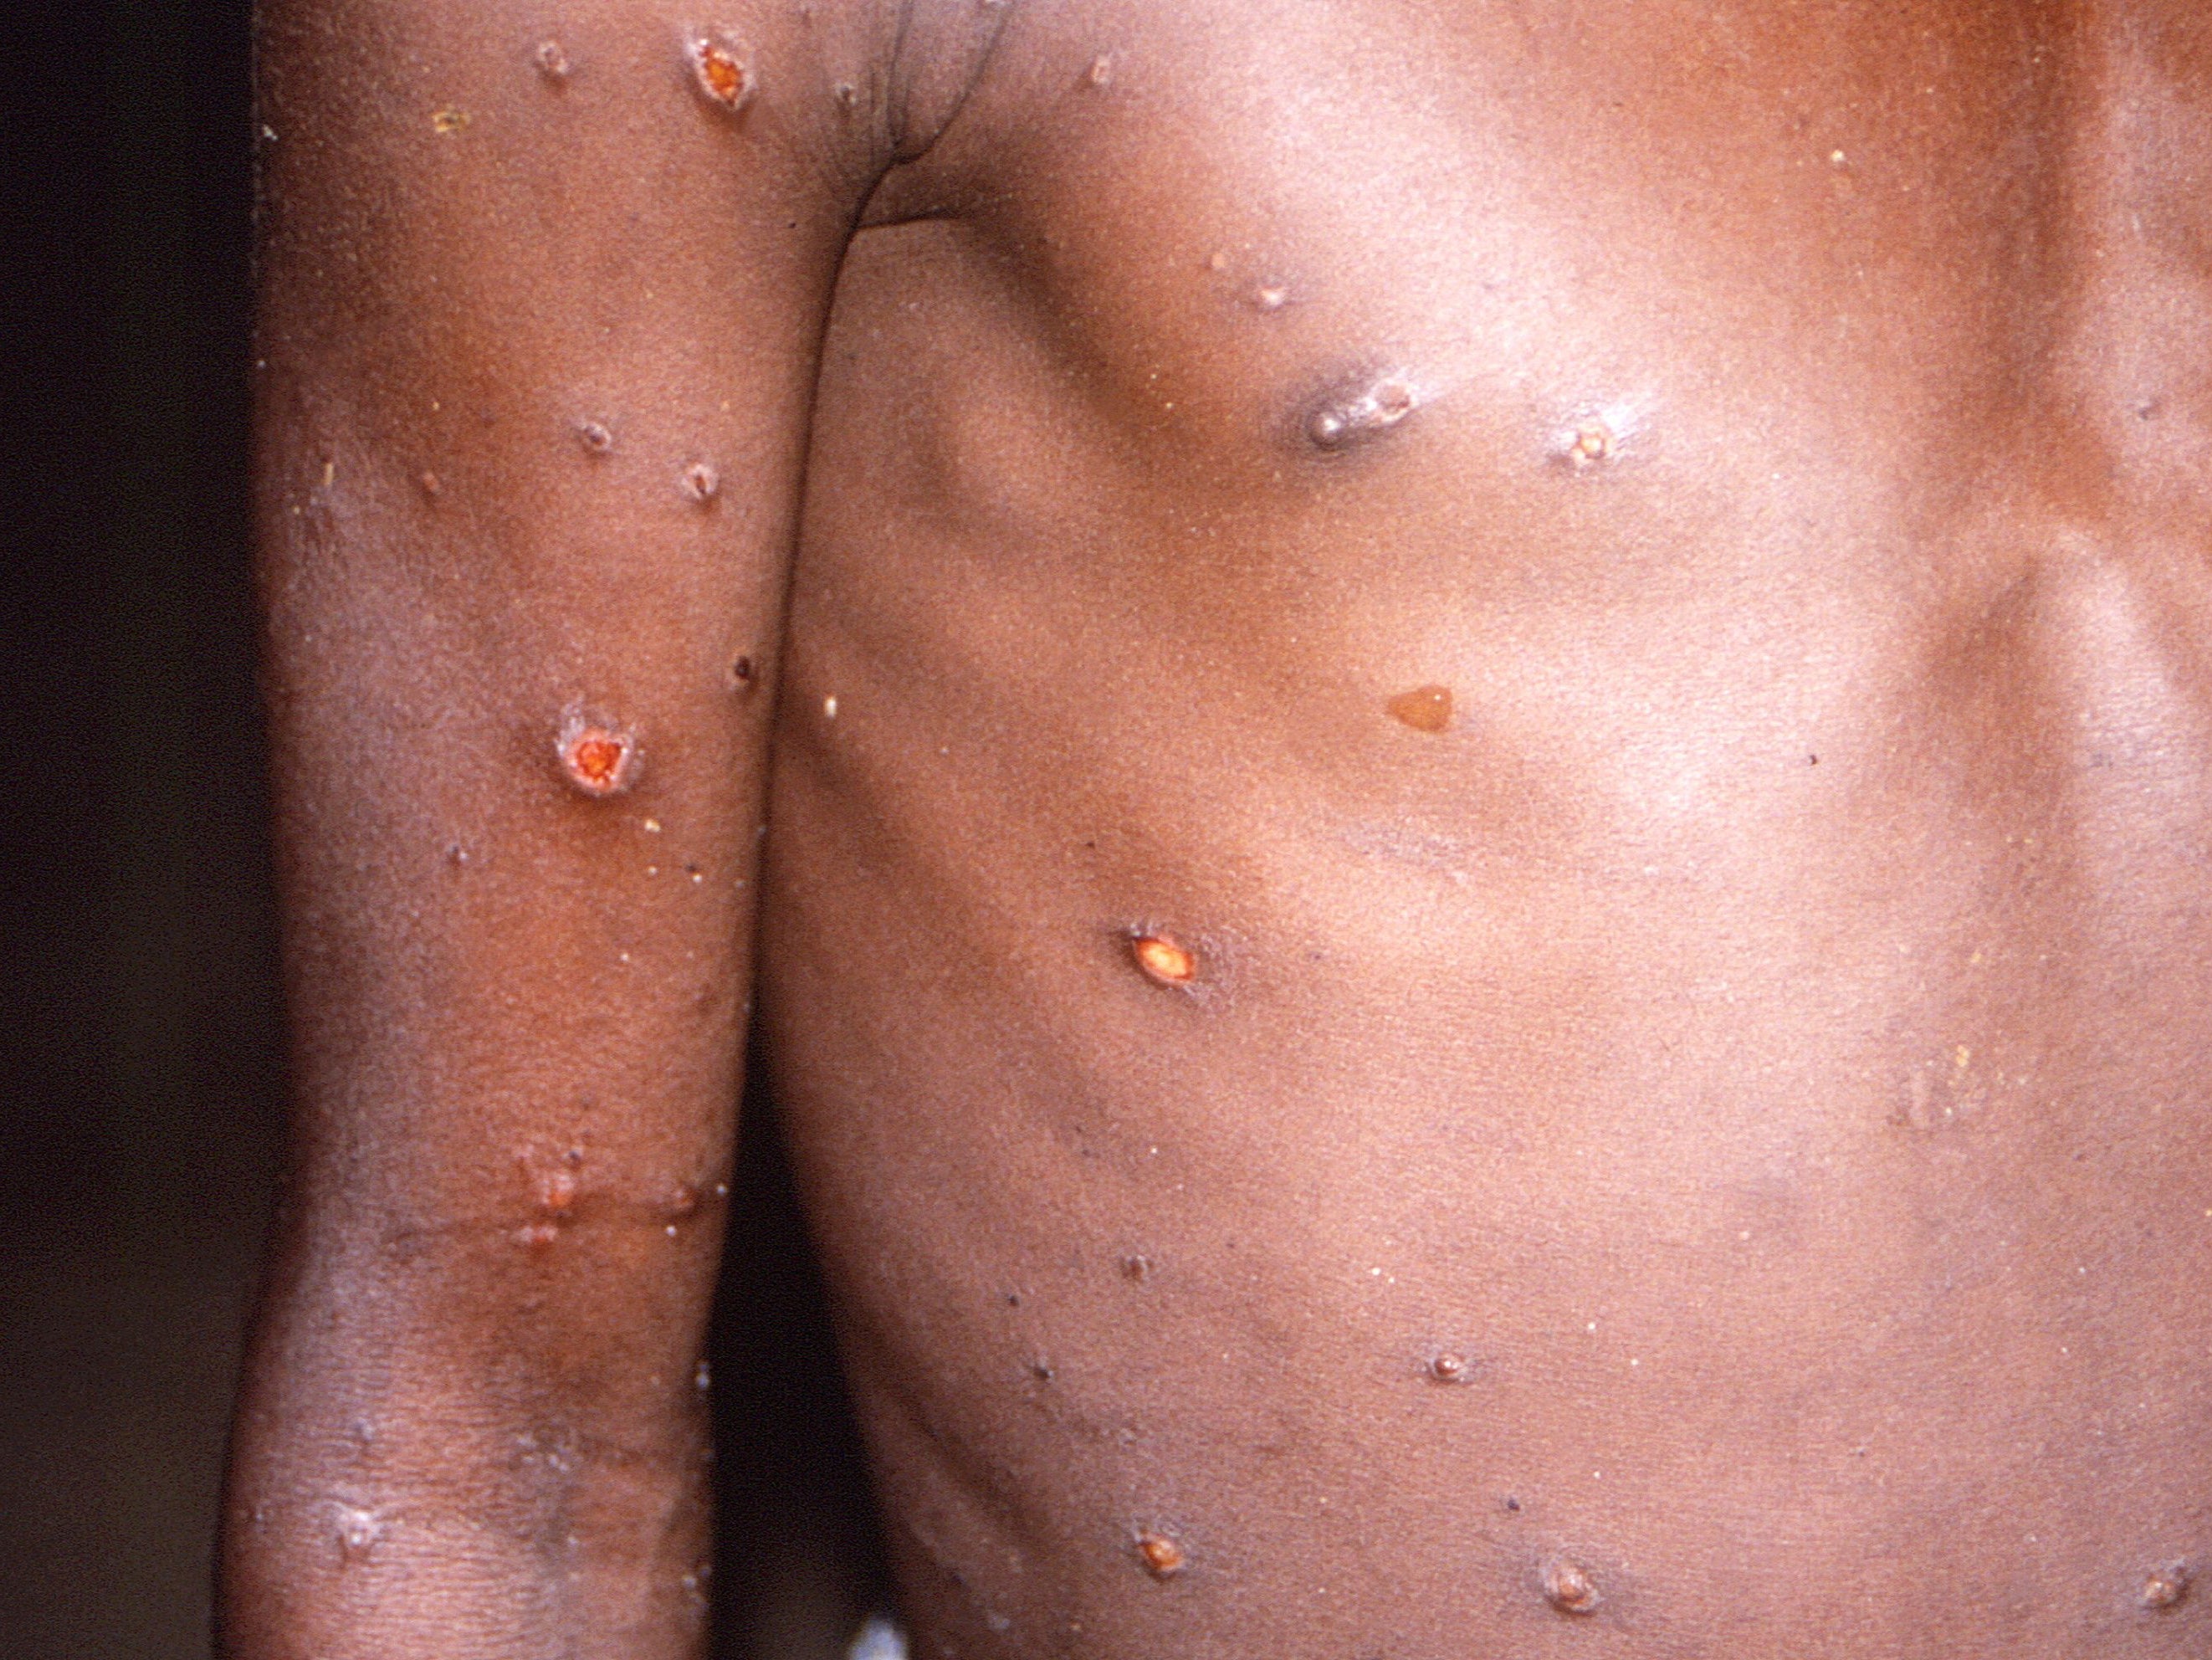 Monkeypox was first detected in the Democratic Republic of the Congo in 1970